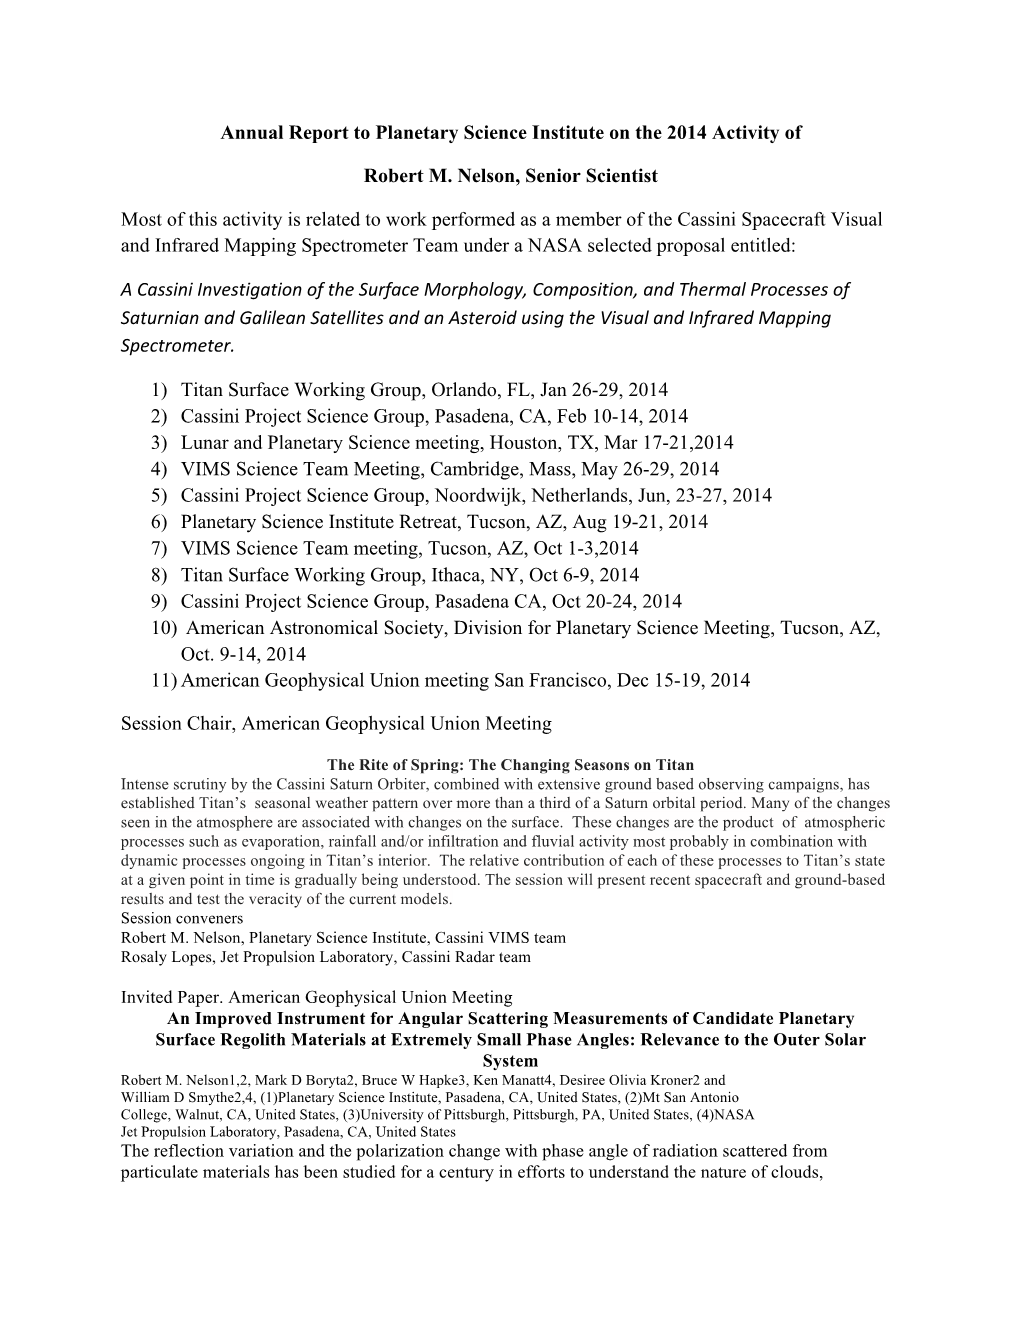 Annual Report to Planetary Science Institute on the 2014 Activity of Robert M. Nelson, Senior Scientist Most of This Activity I